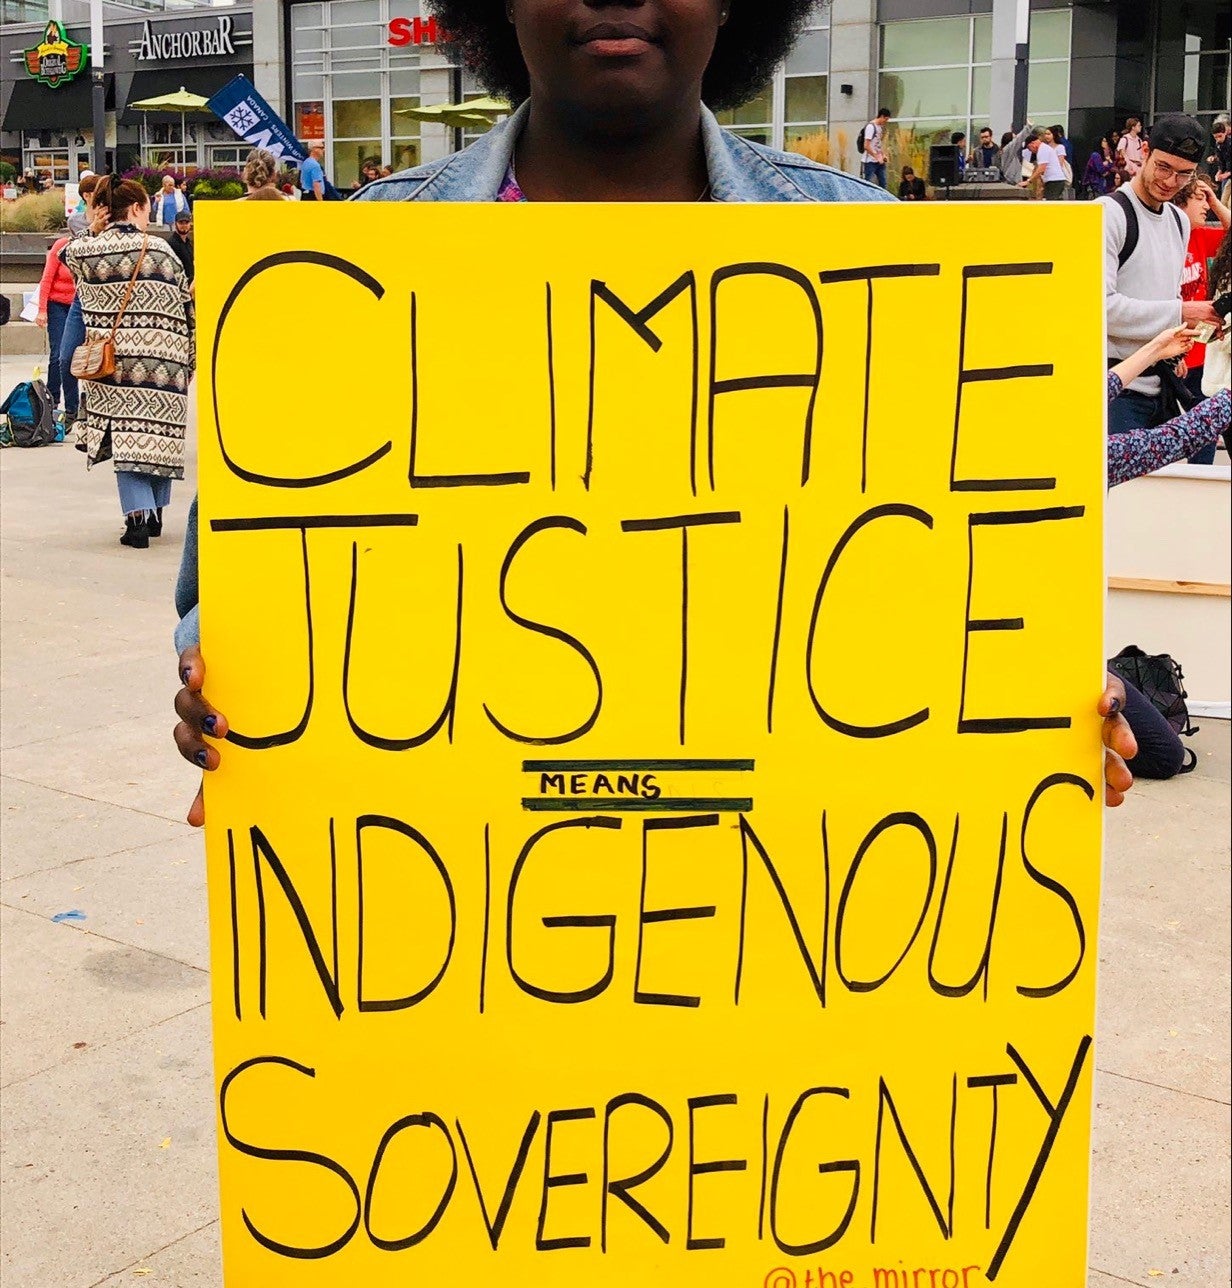 Climate poster at protest